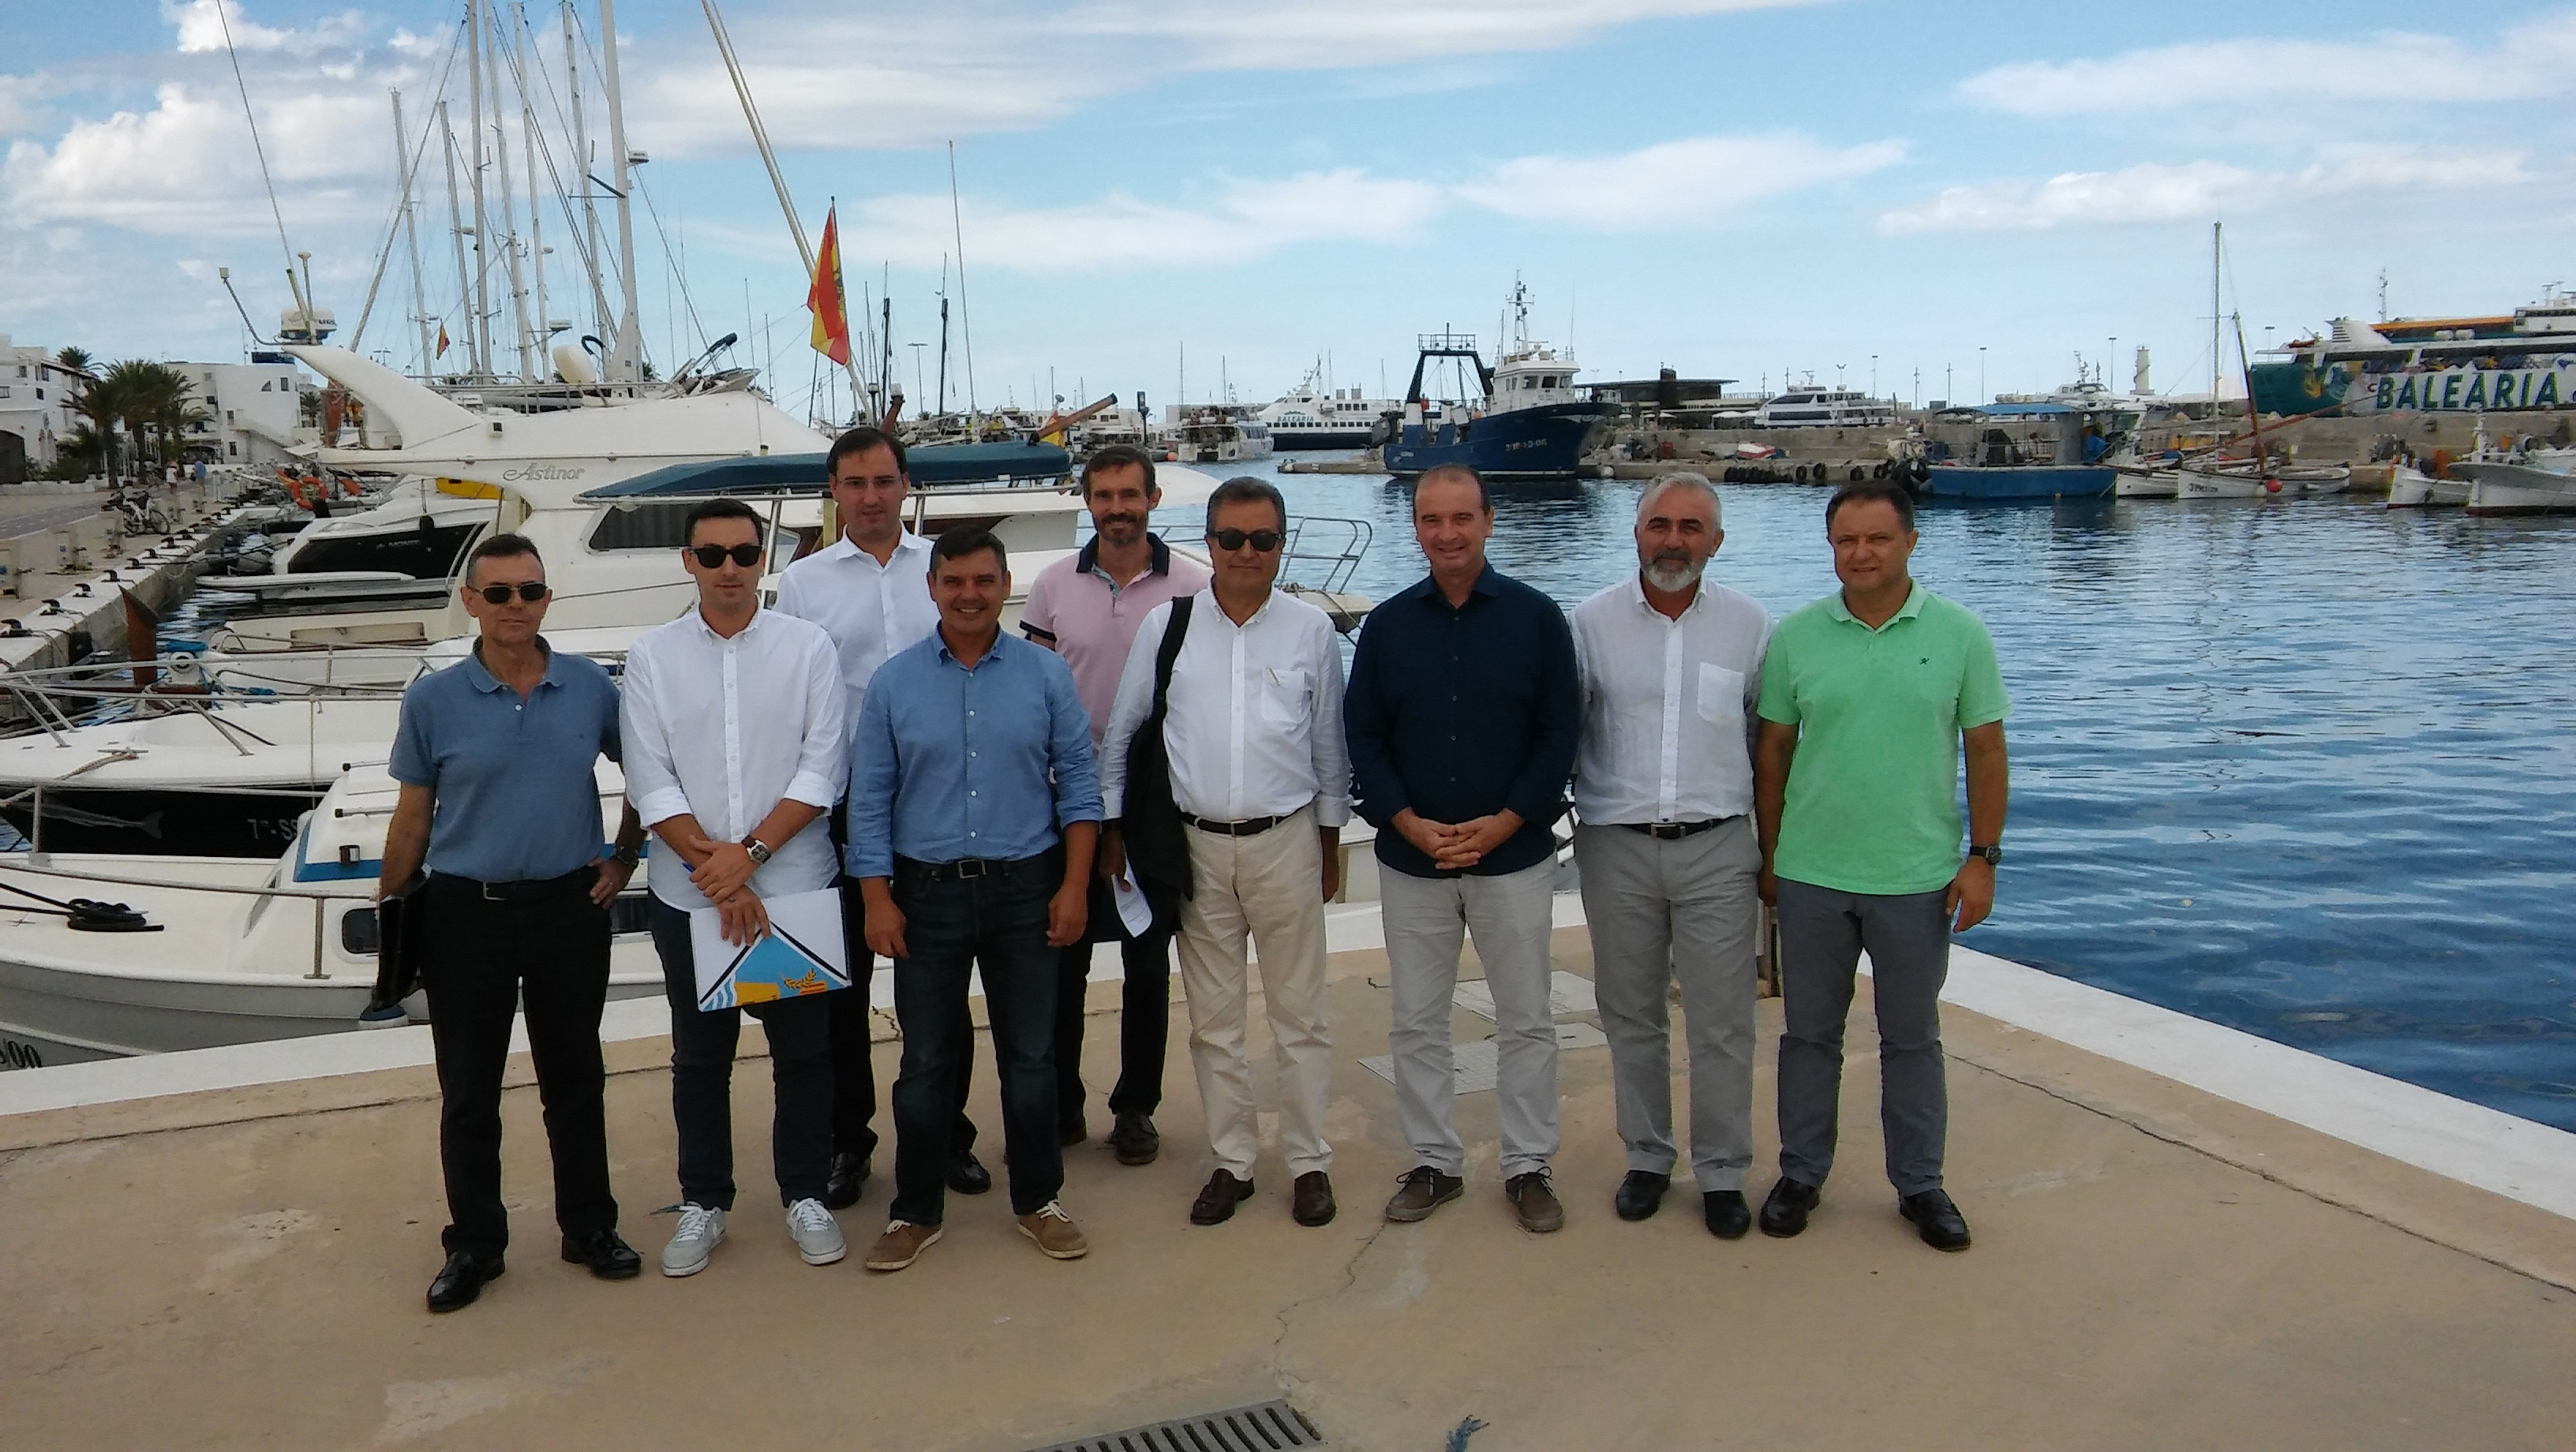 The APB meets with the Island Council of Formentera for the first time regarding the comprehensive improvement project on the Port of la Savina